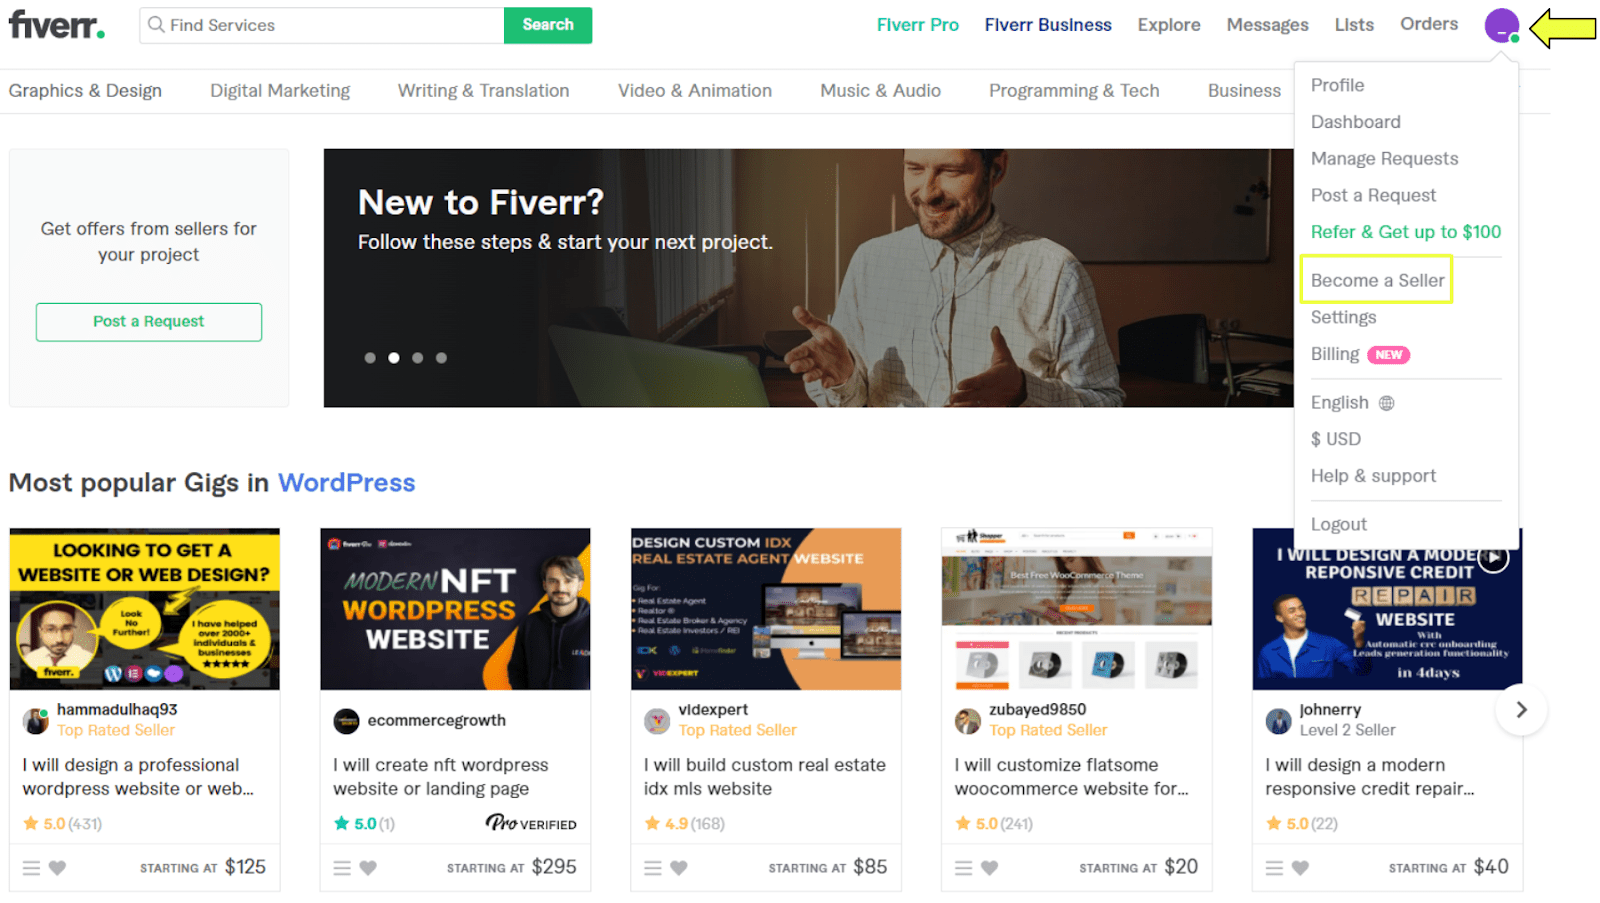 Fiverr become a seller